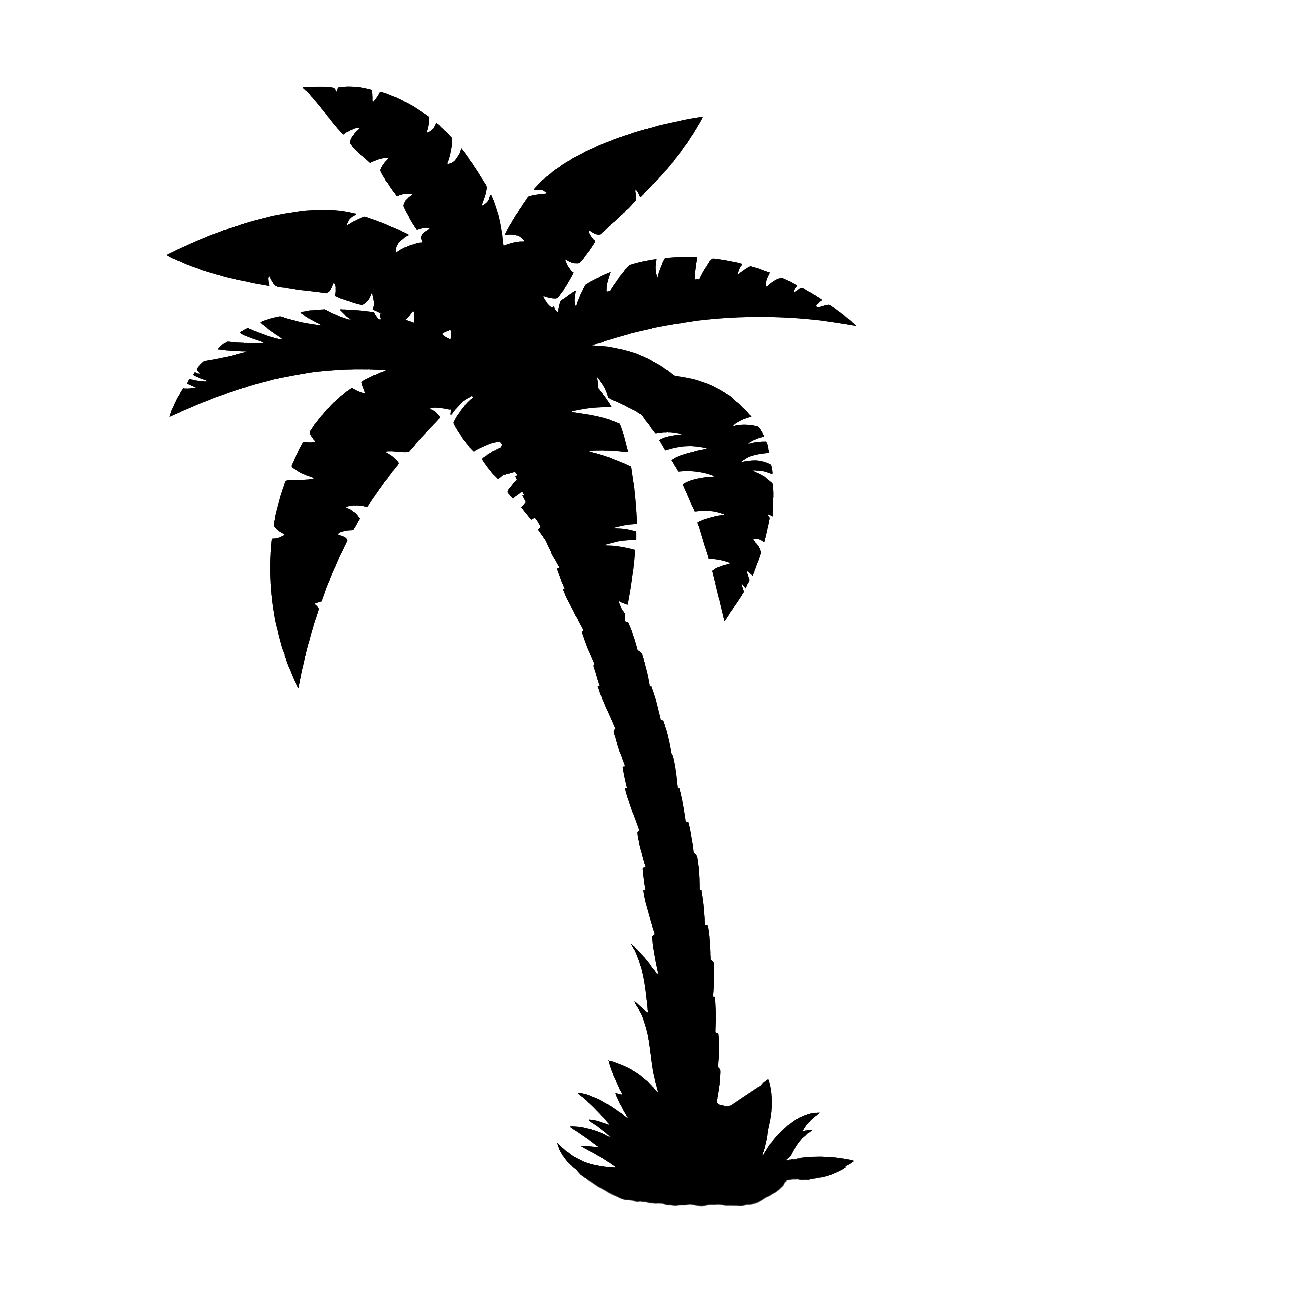 82027907-tropical-palm-trees-silhouettes-isolated-on-white-background-coconut-trees-vector-illus.jpg